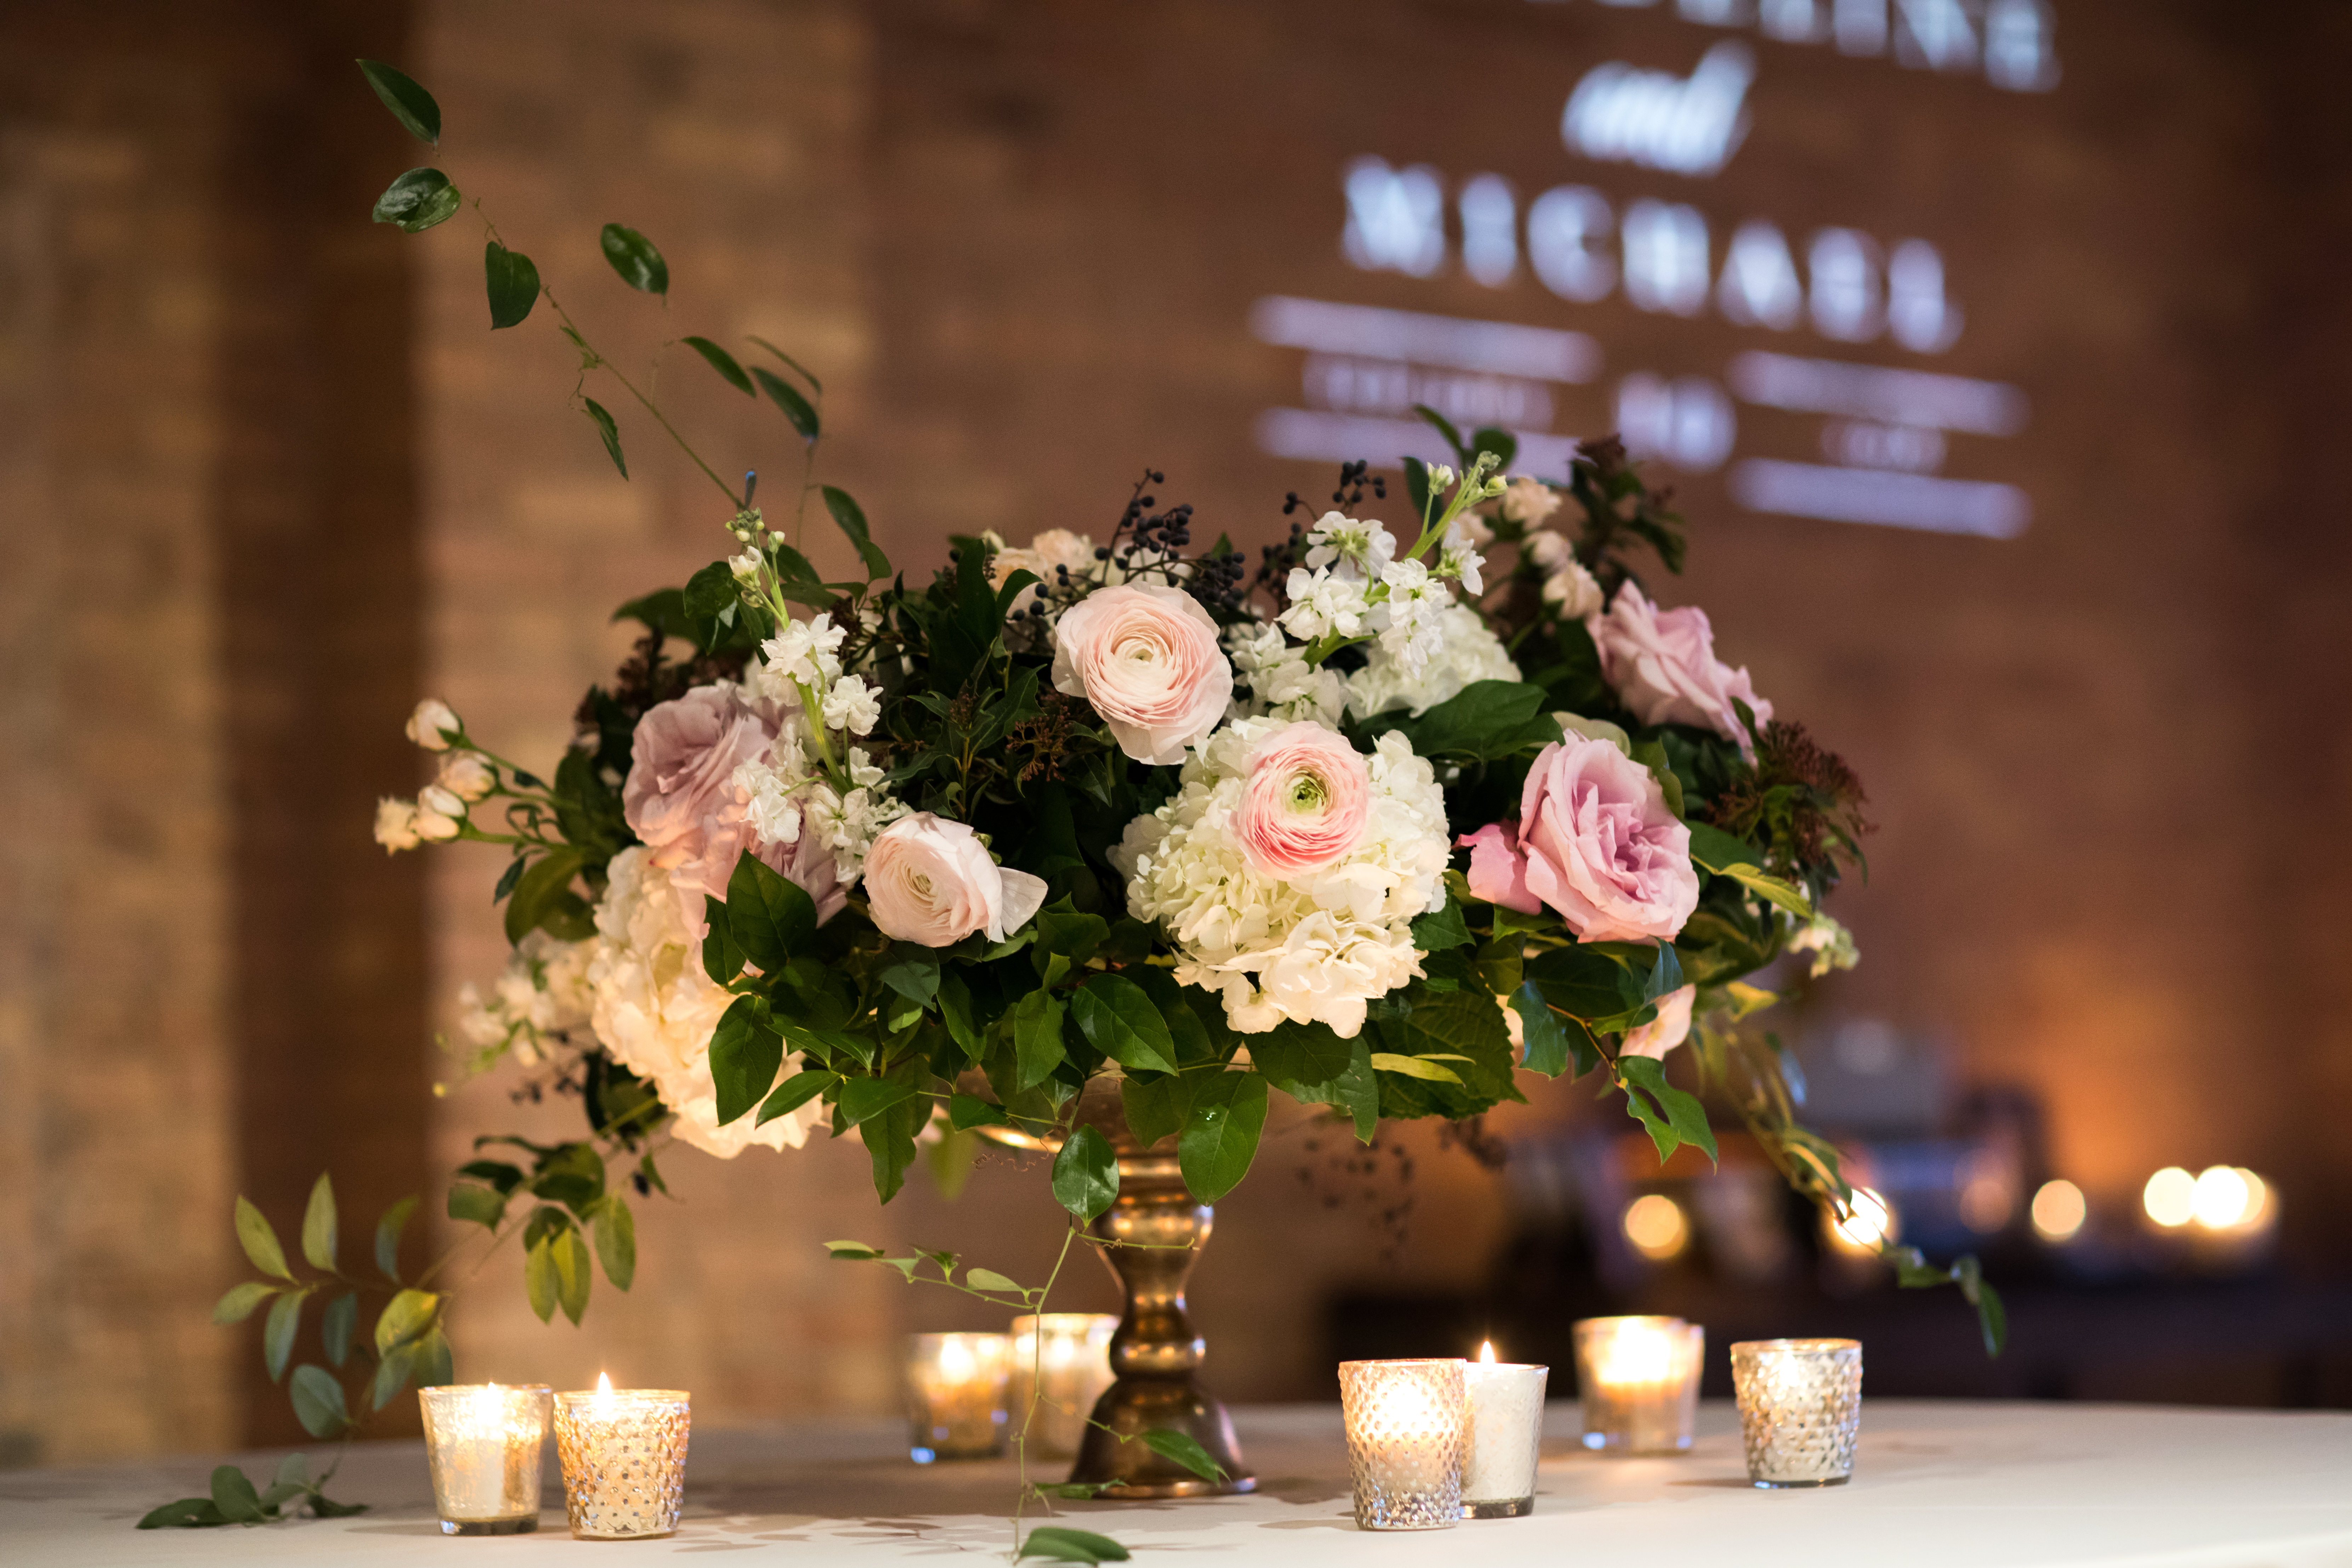 Winter wedding arrangement of white hydrangea, pink garden roses, and blush ranunculus for the escort card table.